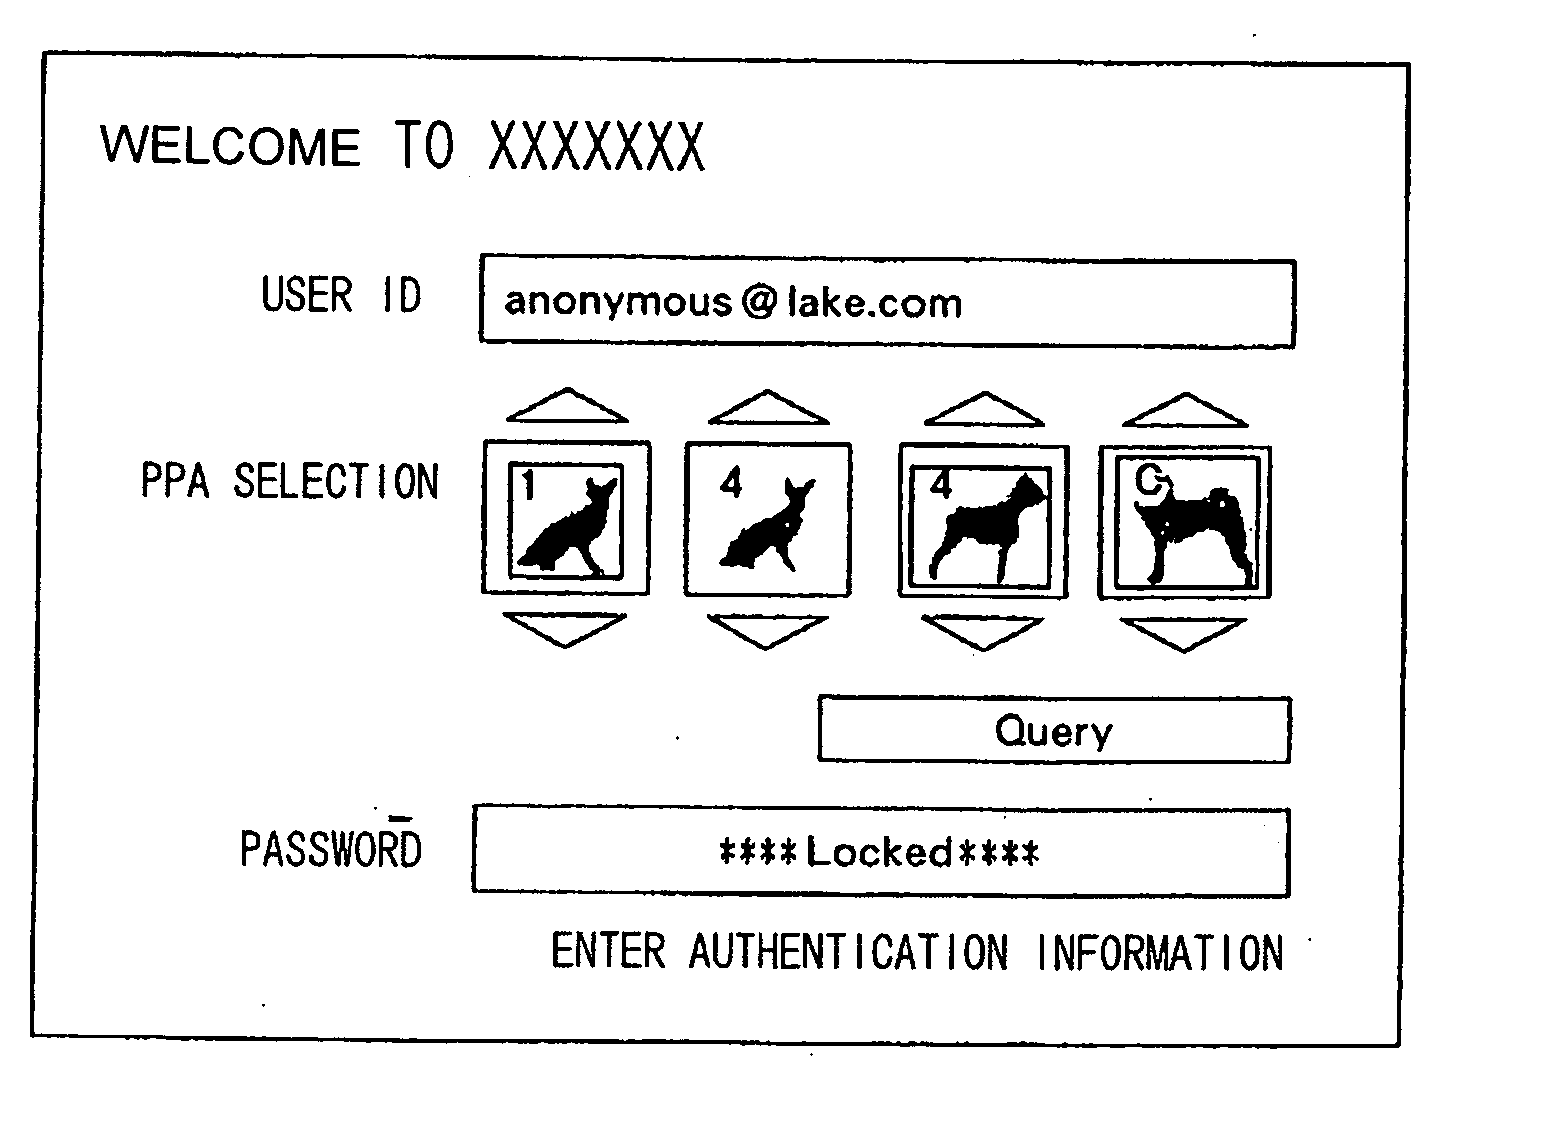 Image array authentication system